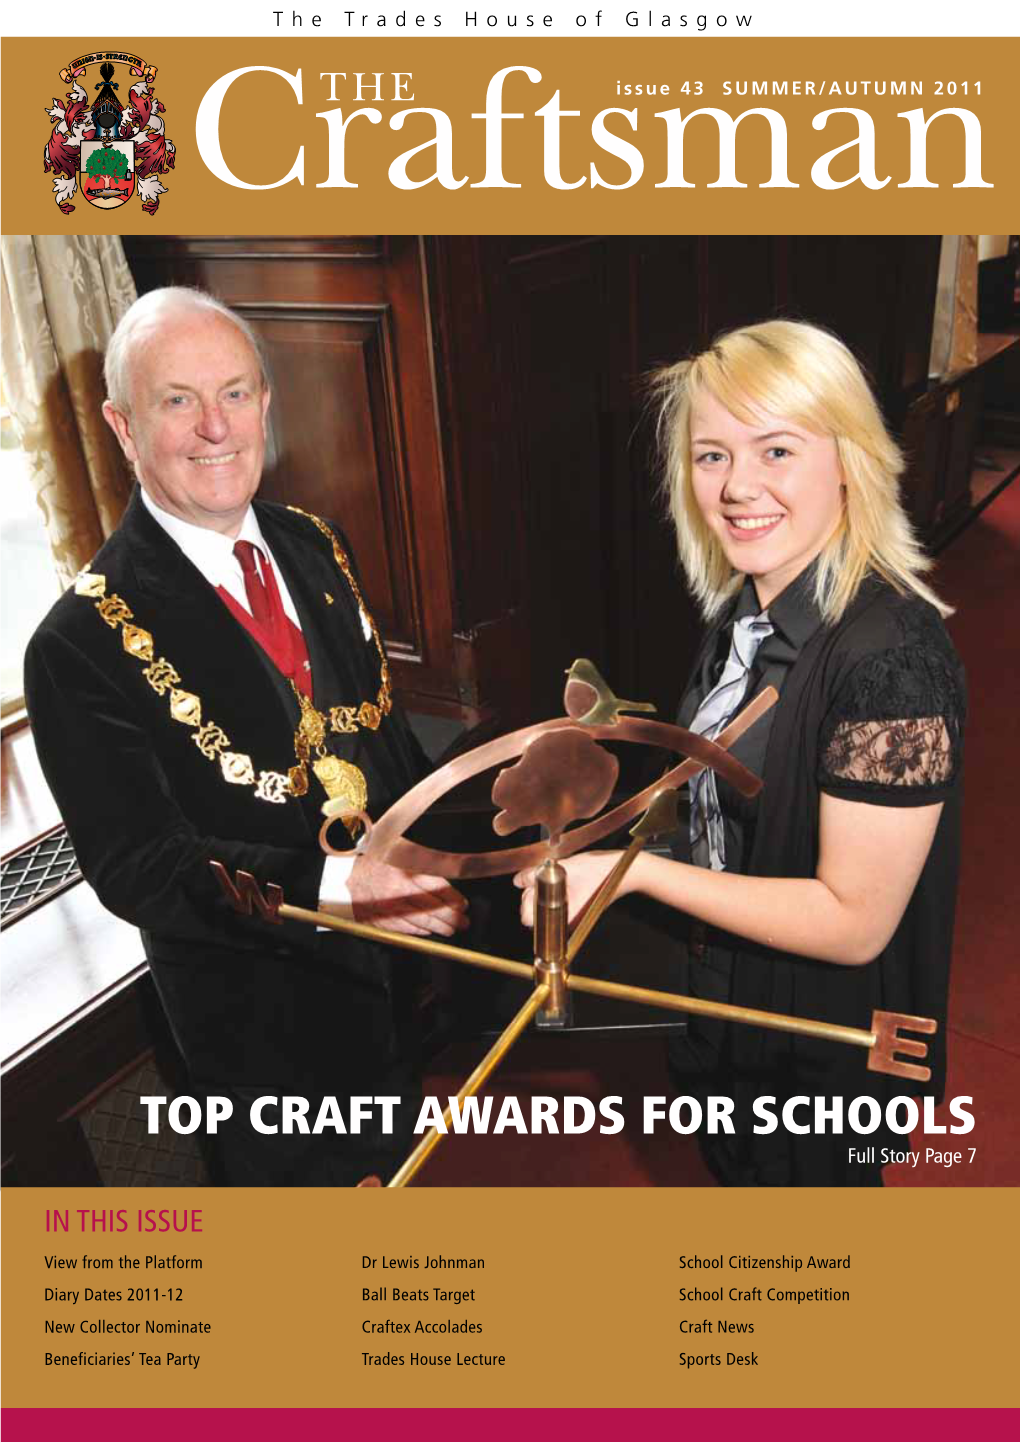 TOP CRAFT AWARDS for SCHOOLS Full Story Page 7